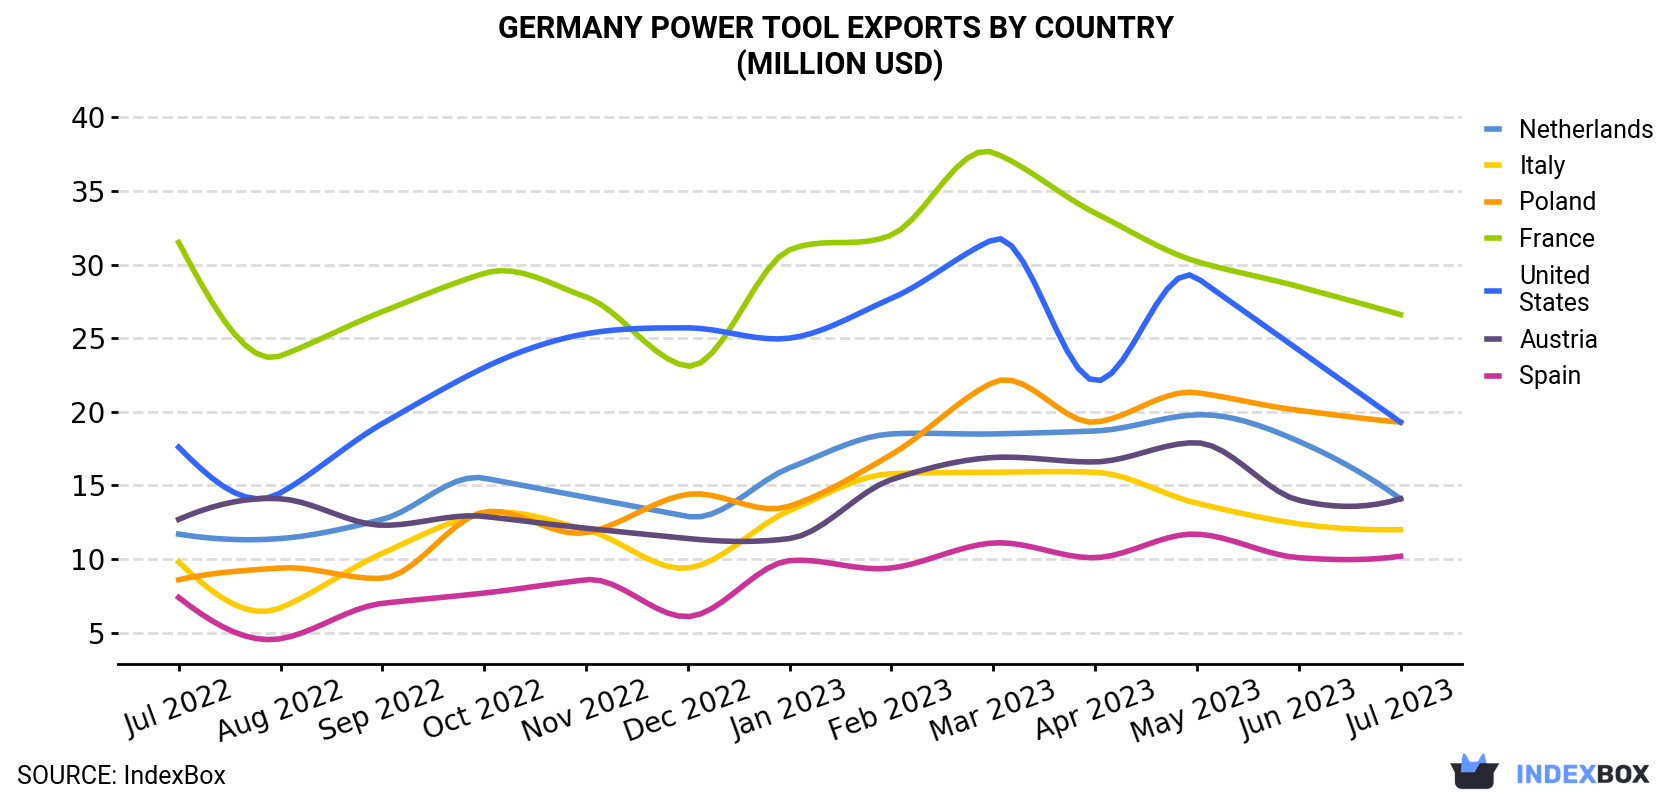 Germany Power Tool Exports By Country (Million USD)